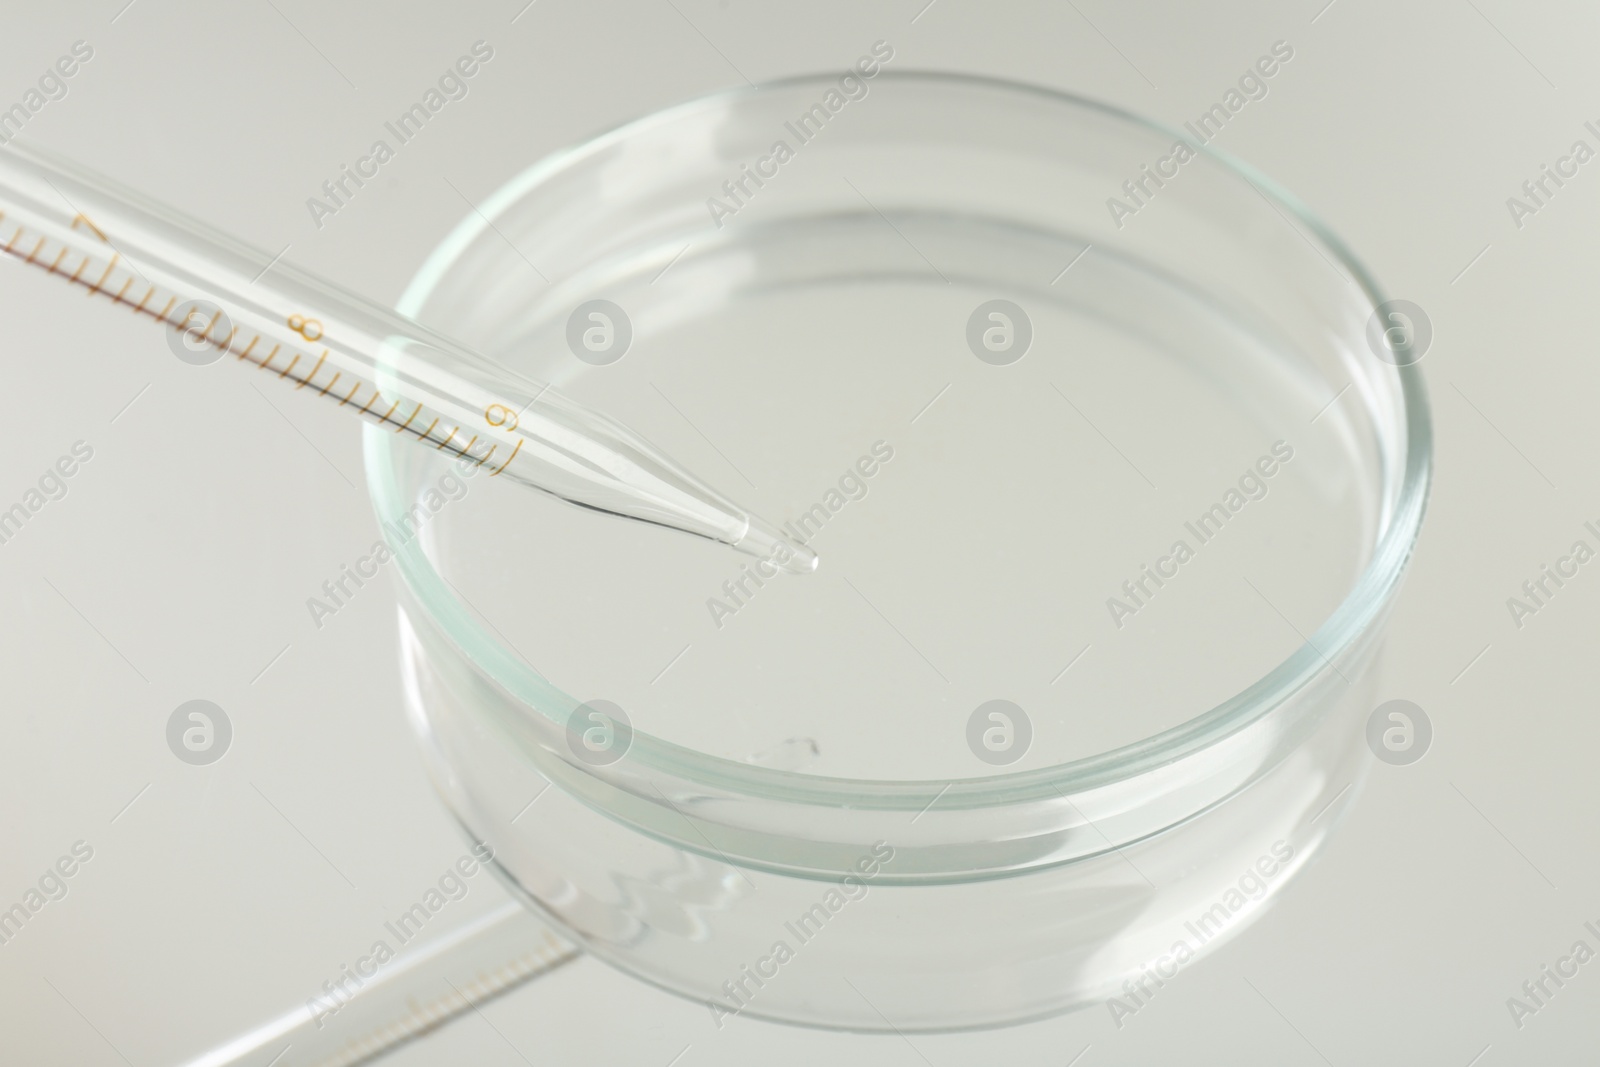 Photo of Petri dish and pipette with liquid sample on mirror surface, closeup